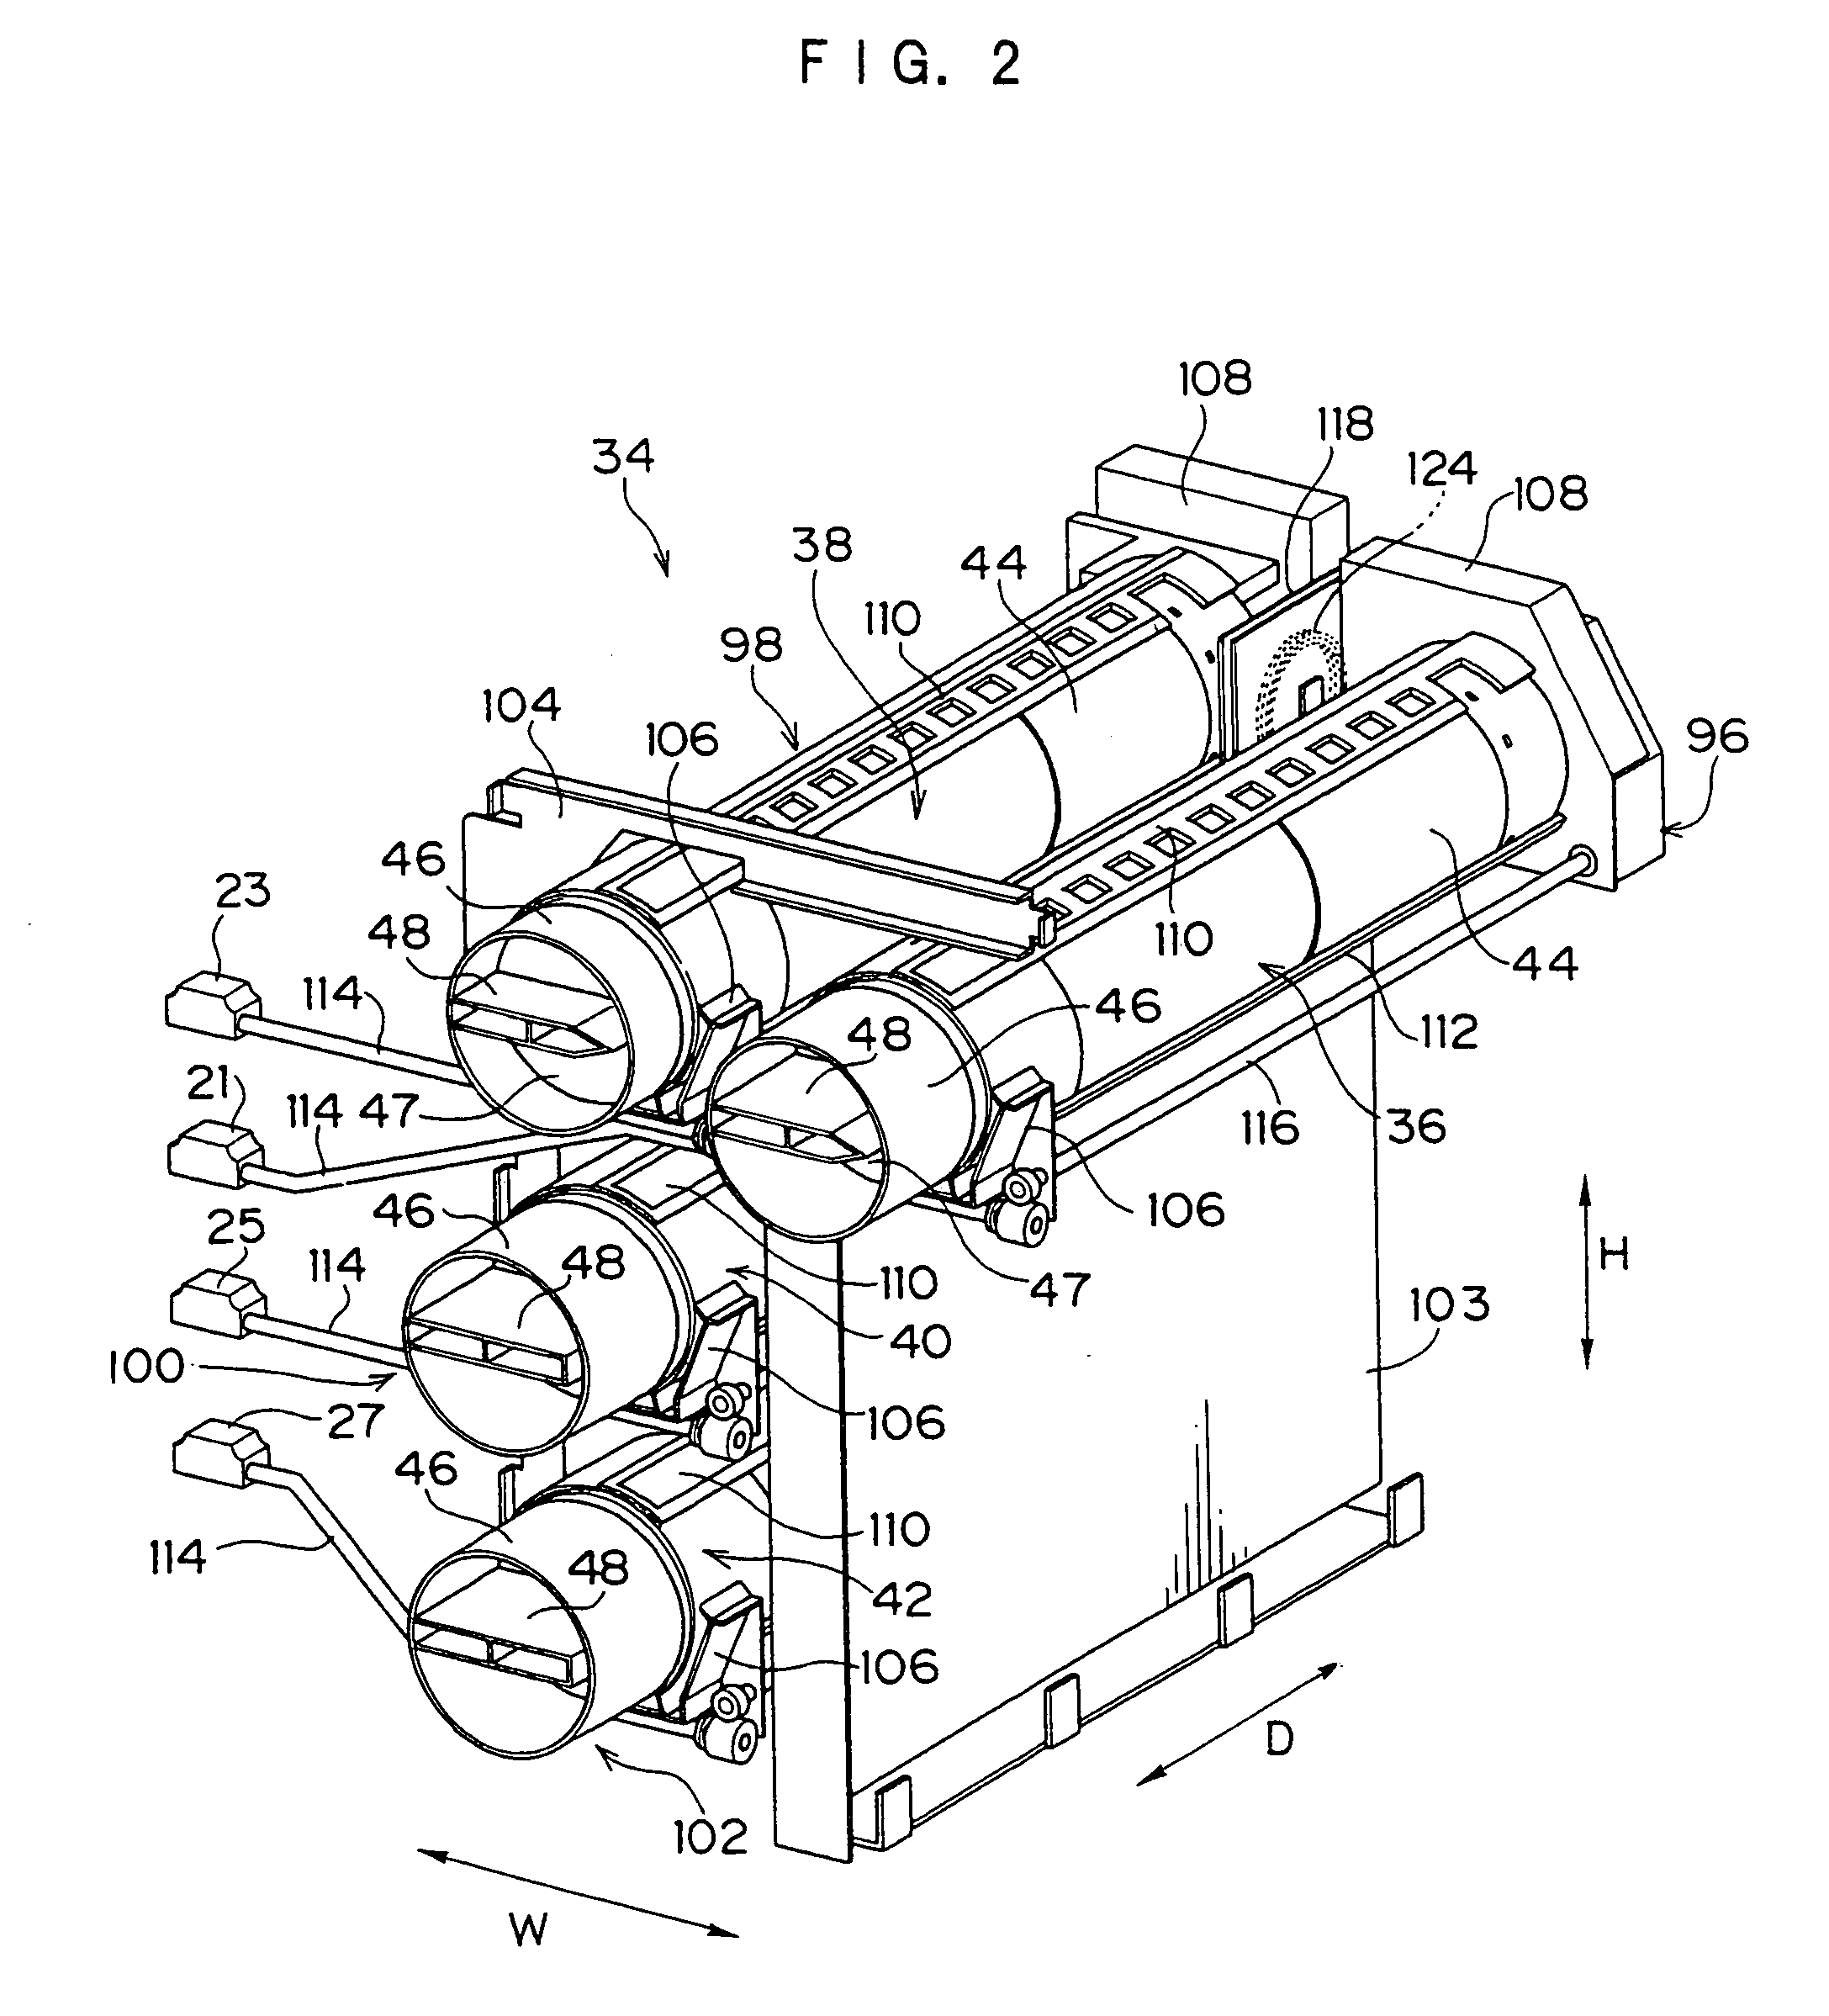 Cartridge, indentification information tag and image forming device